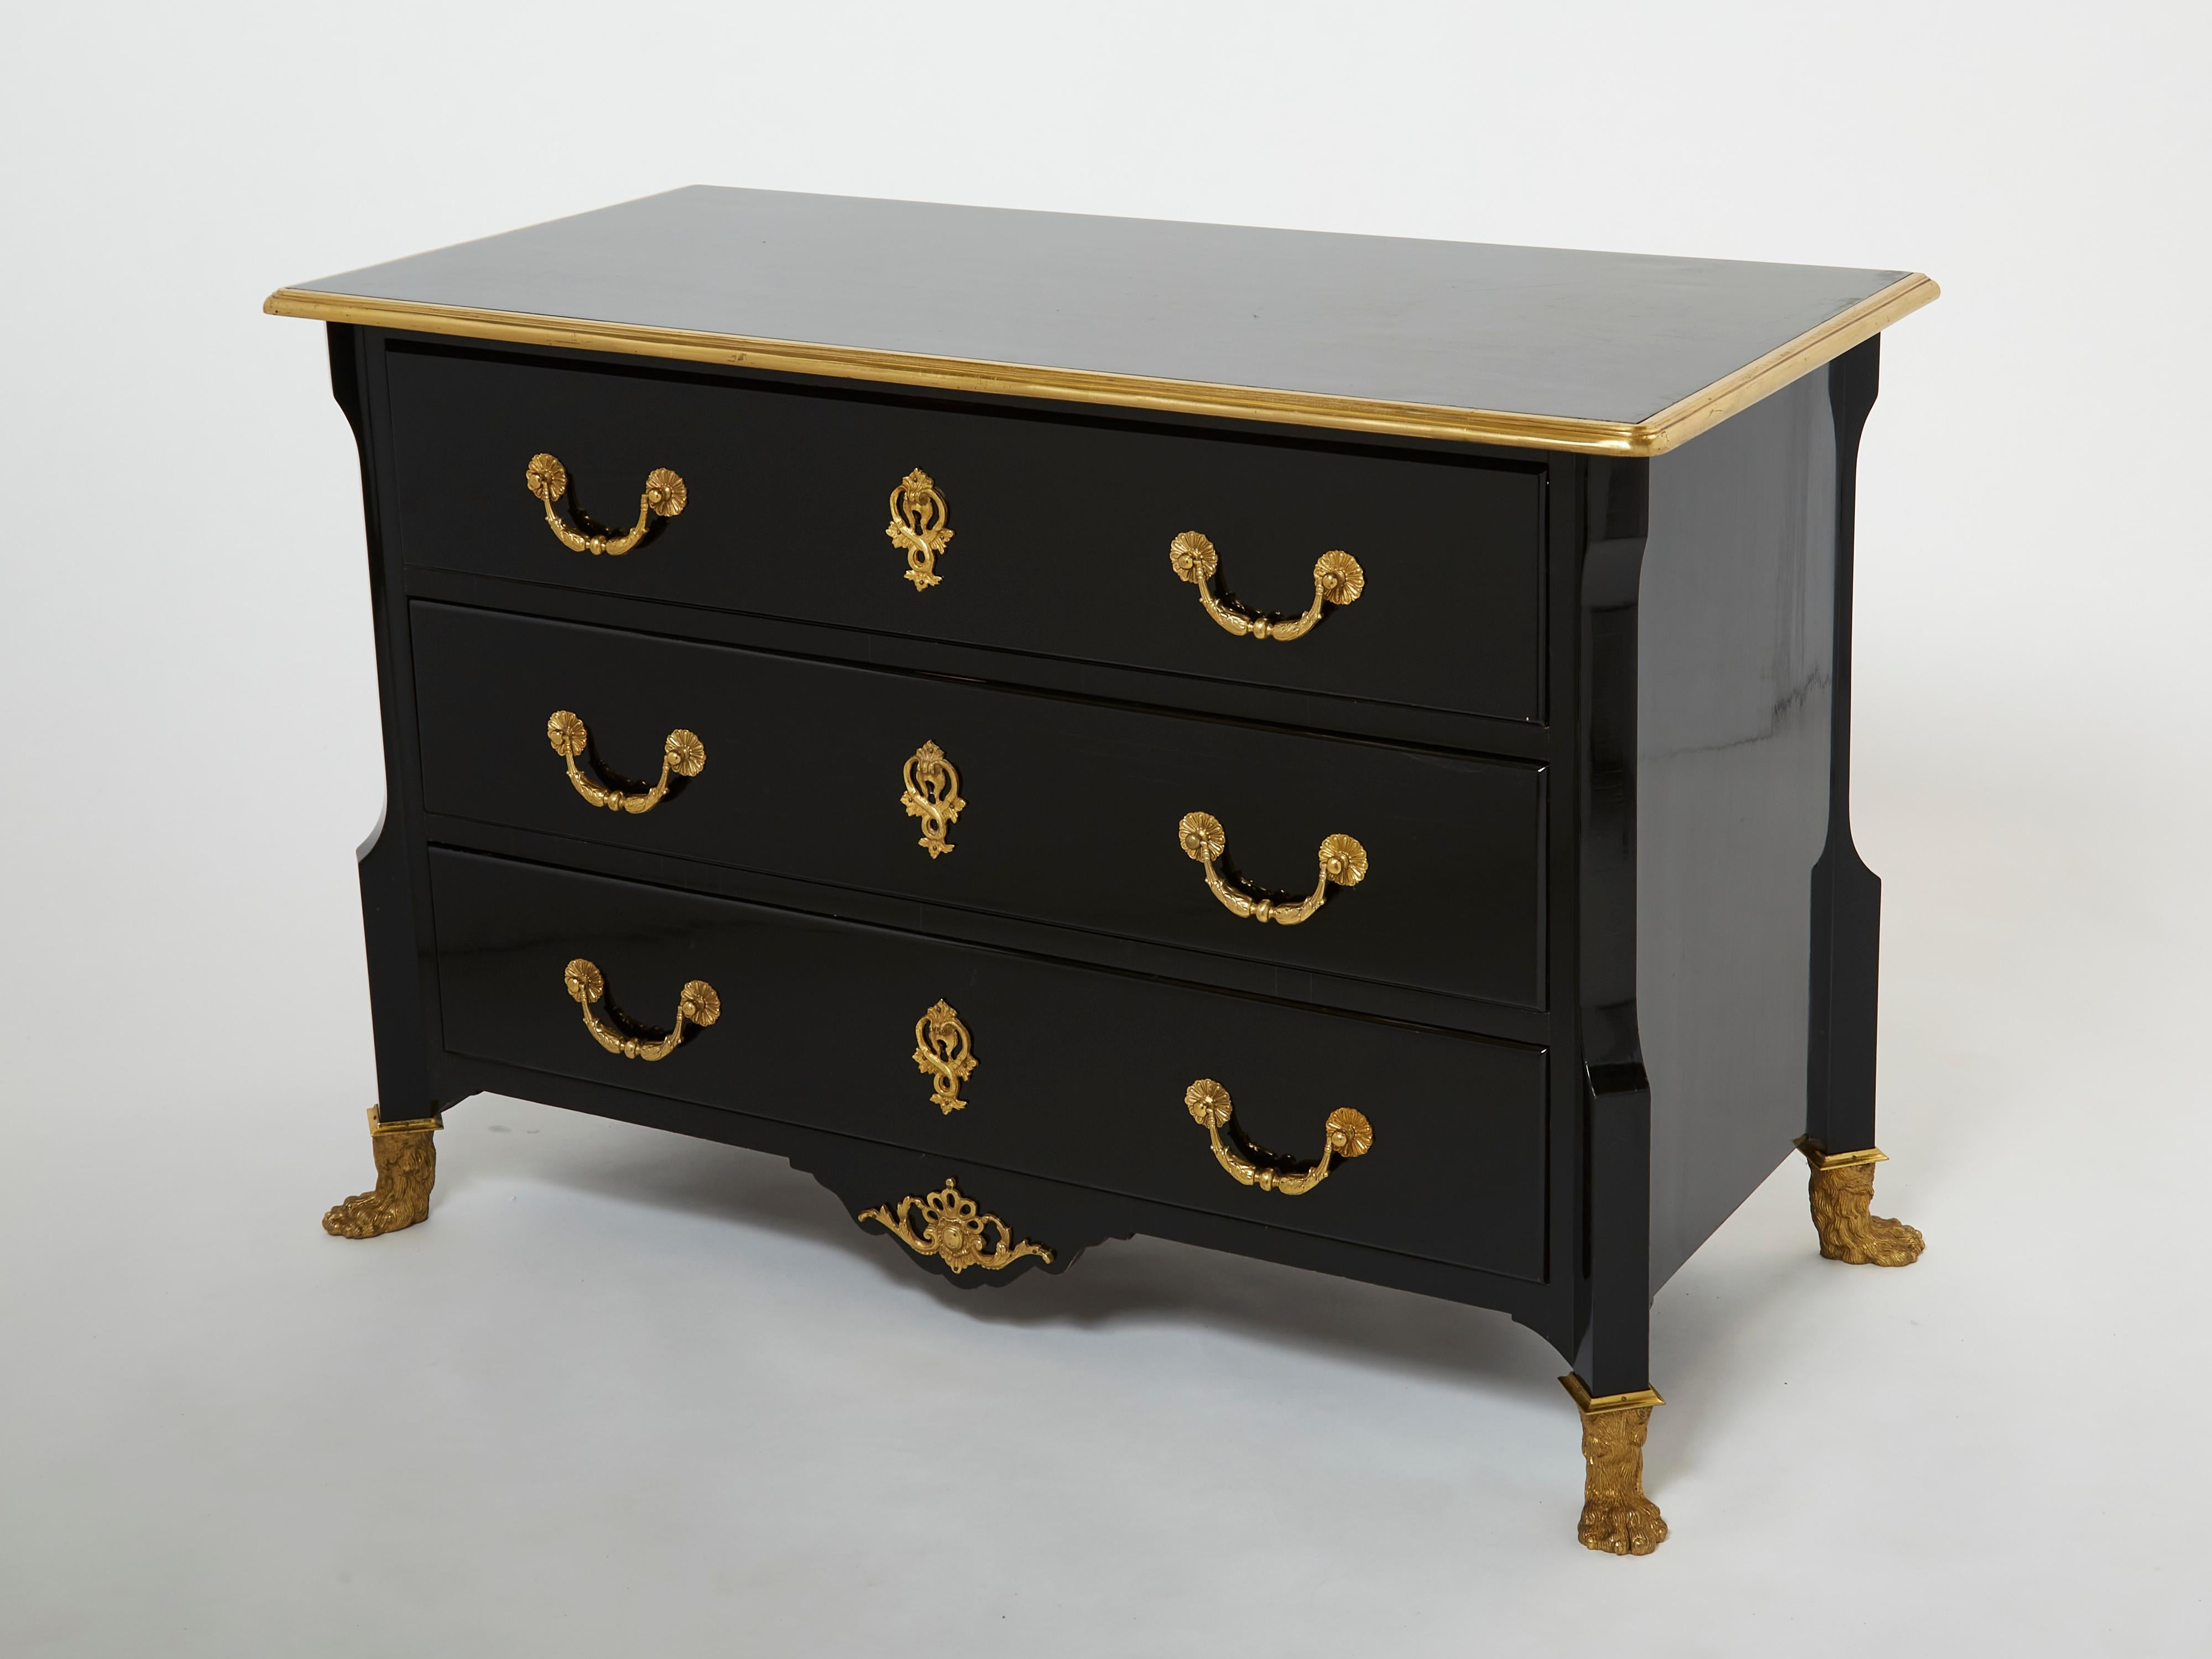 An exciting example of French design firm Maison Jansen early neoclassical pieces, this French Regency-style commode from the 1950s is imposing. Made from solid mahogany, fully ebonized, varnished and French polished, this stamped Jansen chest of